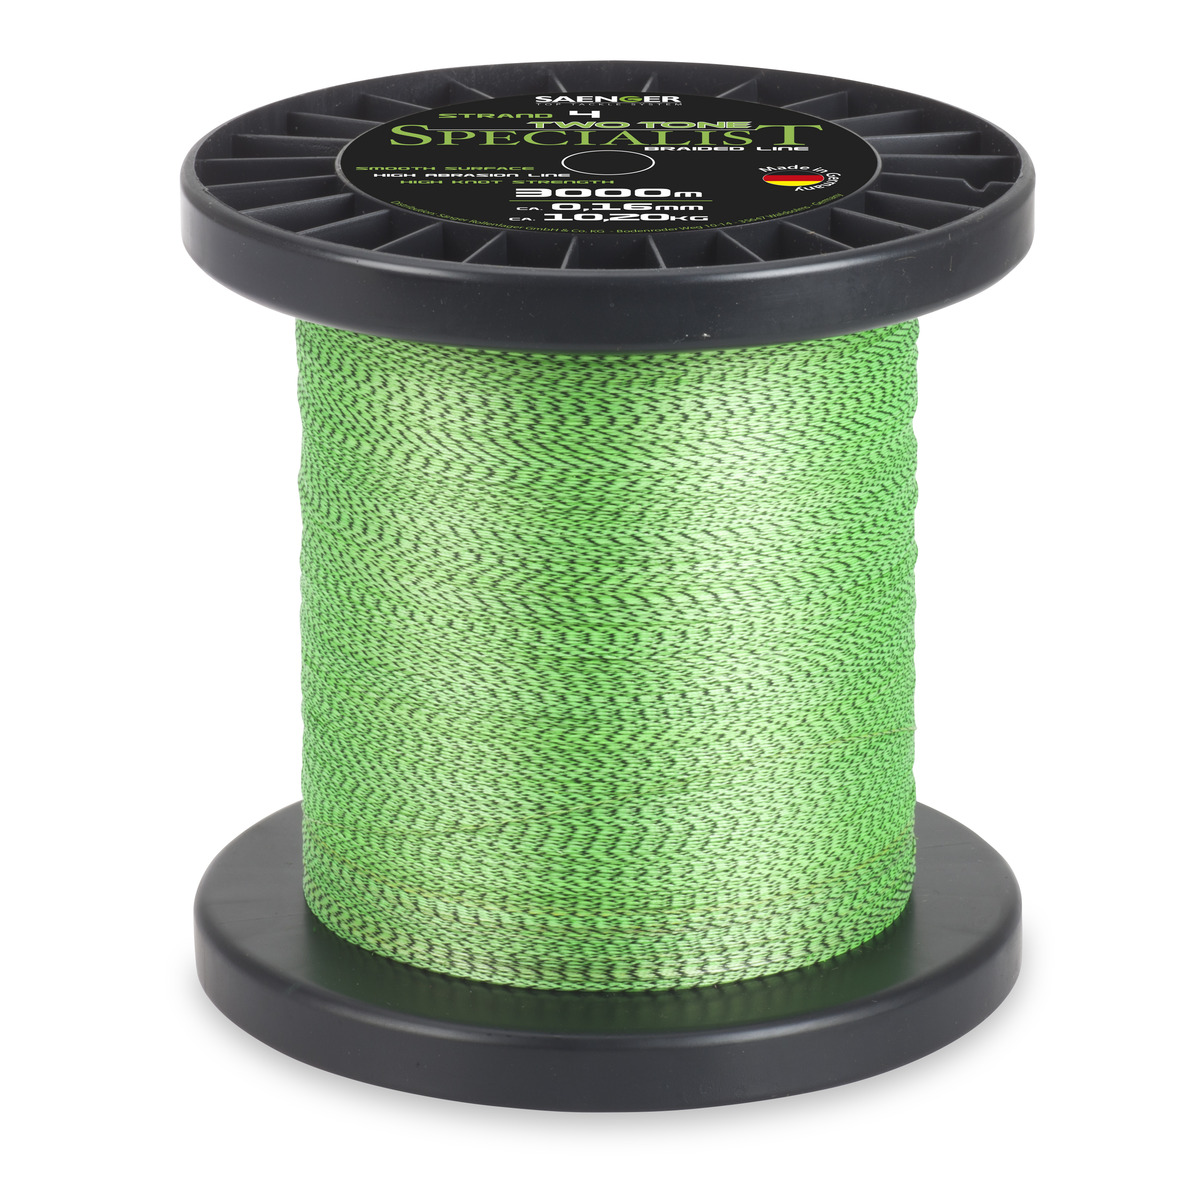 Saenger Specialist Two Tone Fluo Braid - 0,30 mm - 25,4kg 3000 m